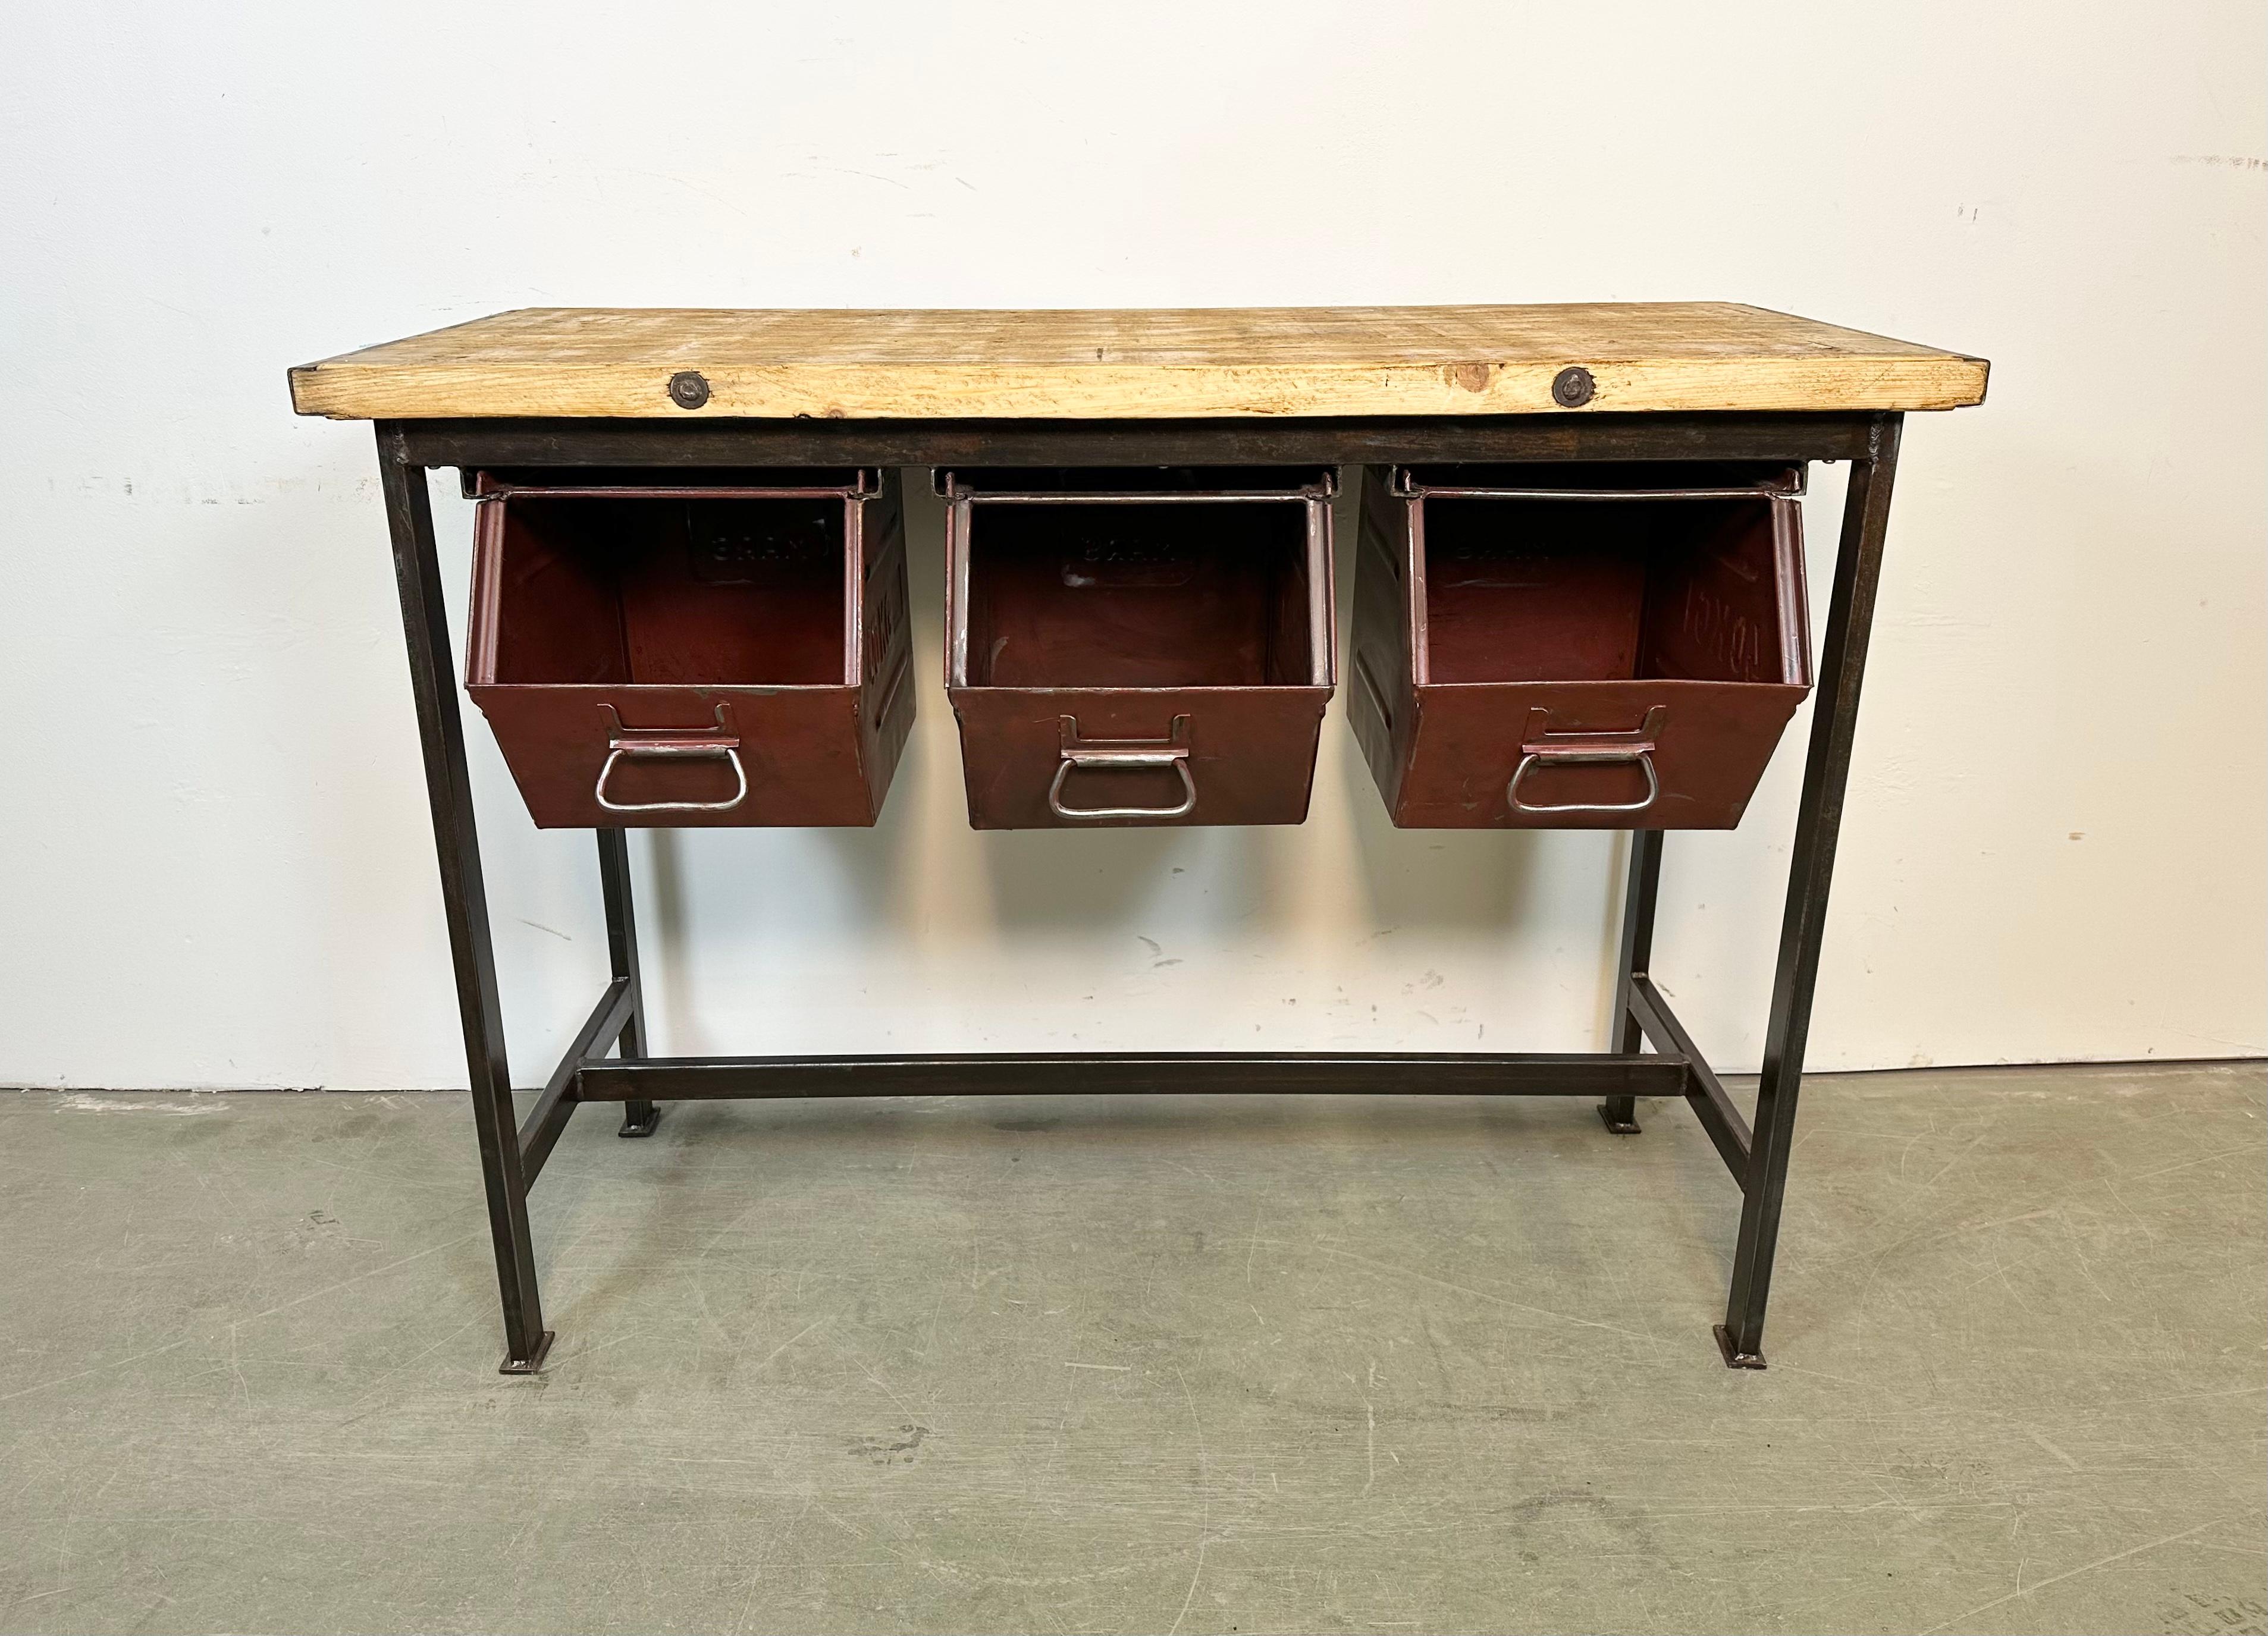 Vintage industrial worktable from the 1960s. It features a black iron construction, solid wooden plate and three red iron drawers. Weight: 41 kg.
Drawer dimensions:
Width: 28 cm
Depth: 39 cm
Height: 30 cm.